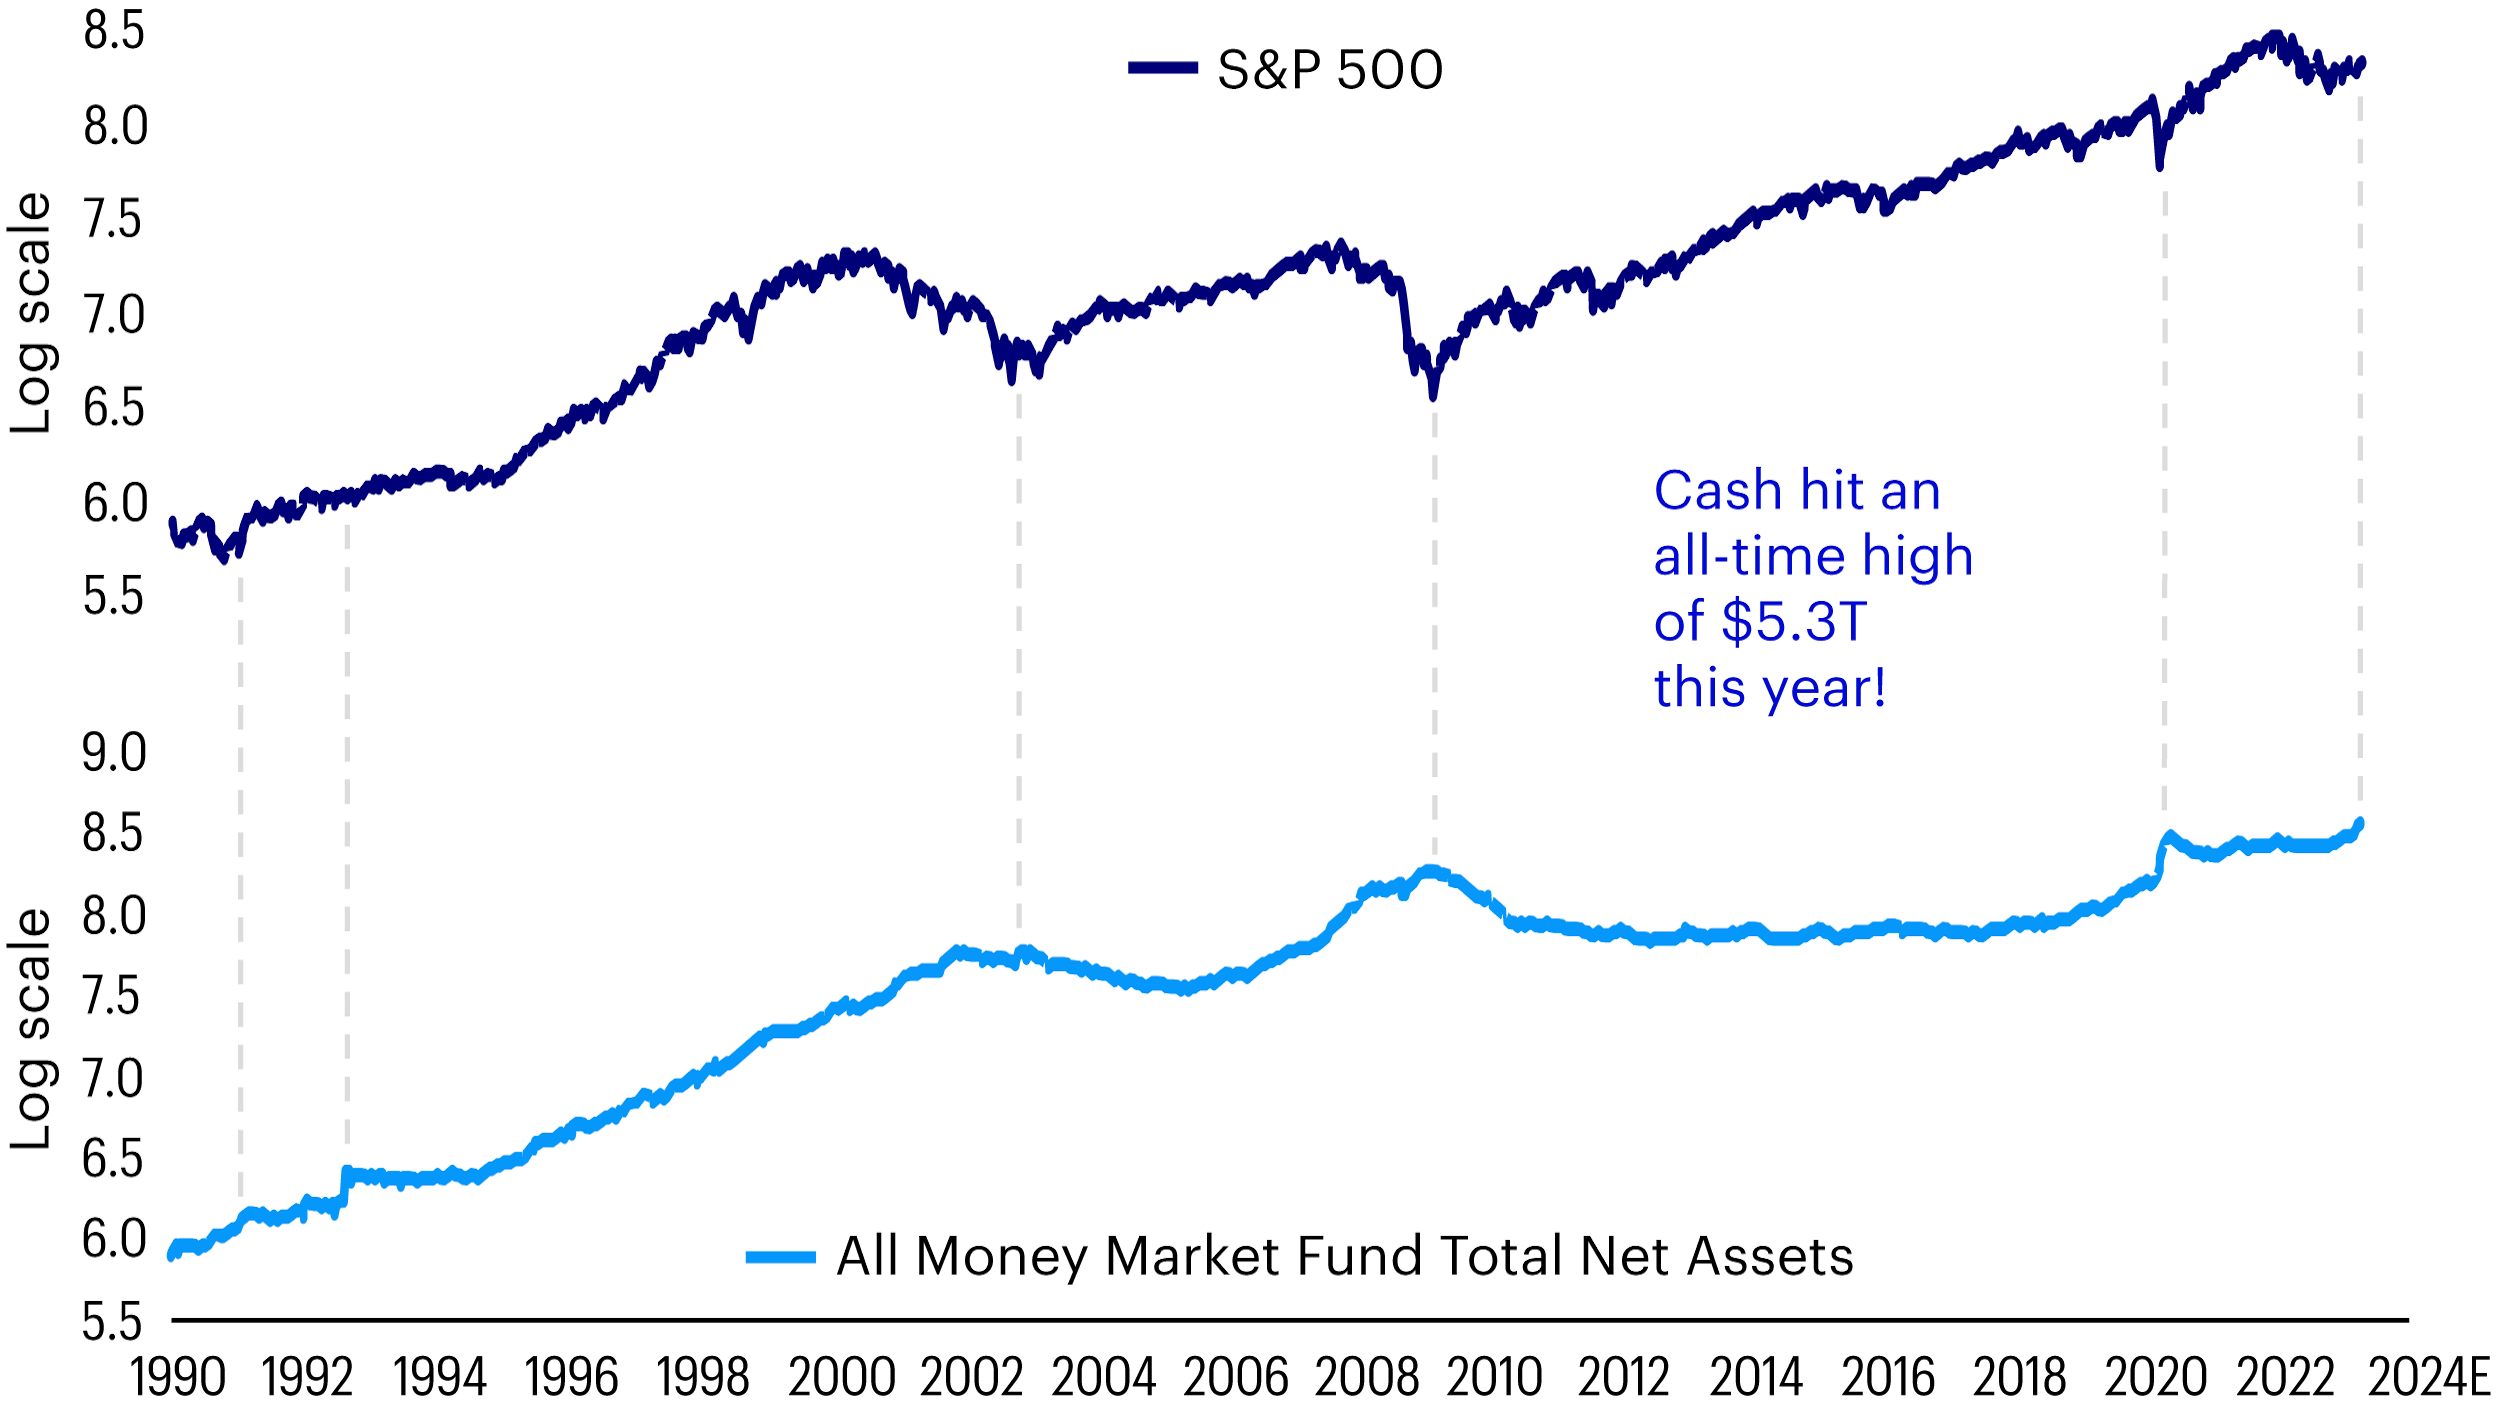 This chart tracks S&P 500 Index performance and money market mutual fund assets since 1990, highlighting times when peaks in cash corresponded to troughs in stocks. Cash hit an all-time high of US$5.3 trillion this year.